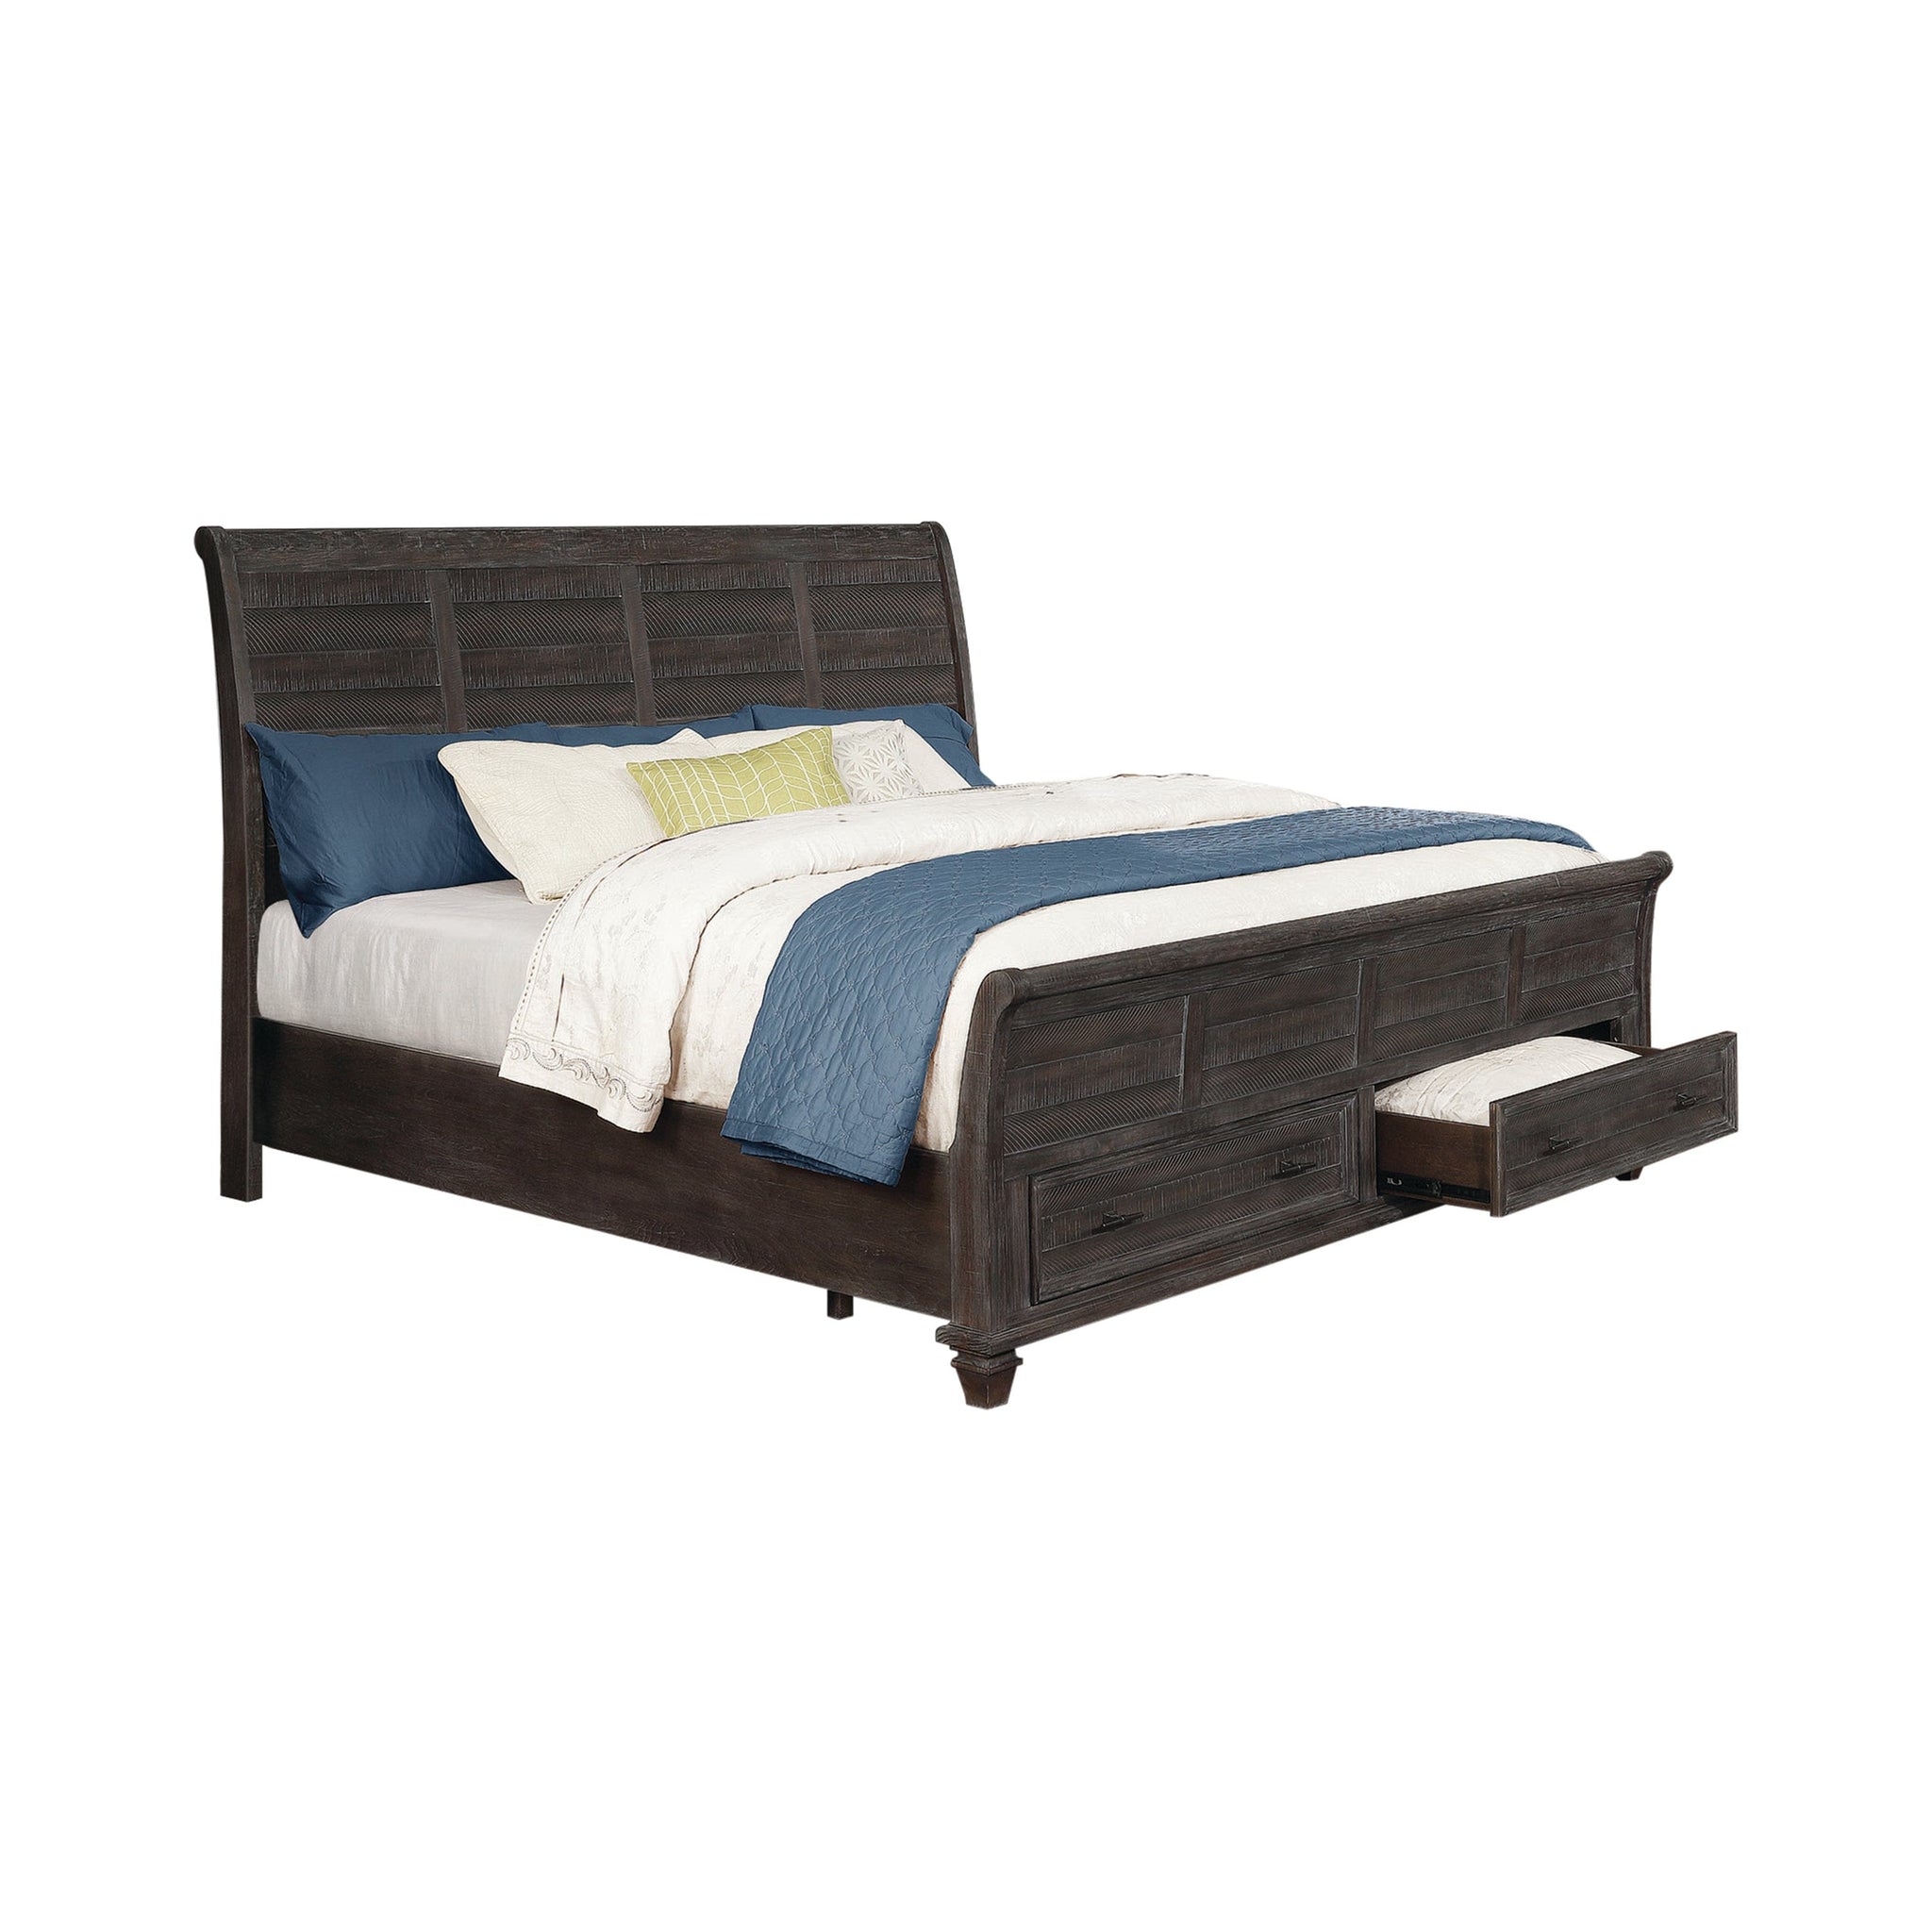 Atascadero Queen 2-Drawer Storage Bed Weathered Carbon Collection: Wine Country Inspiration Makes This Bed One To Relax And Reminisce On. Storage Drawers Add Functionality. SKU: 222880Q